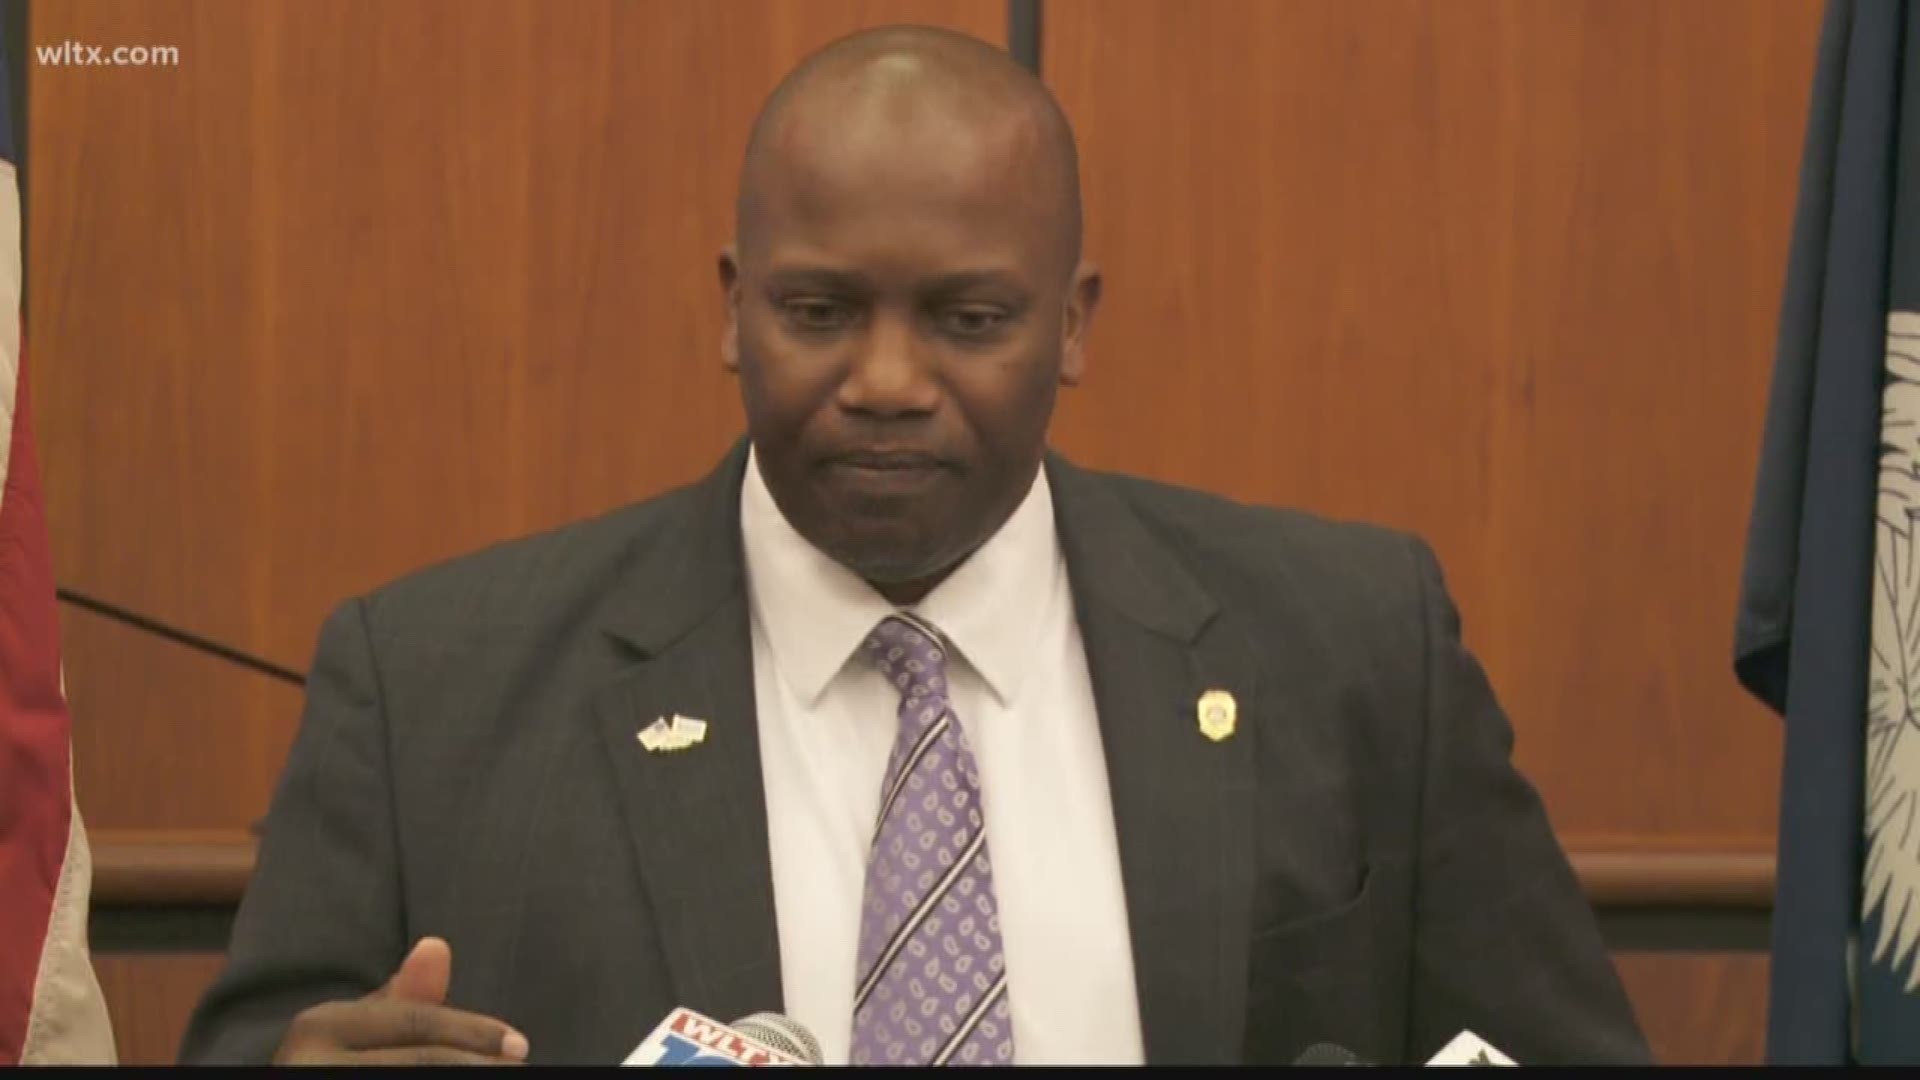 Federal prosecutors have added new charges against suspended 5th circuit solicitor Dan Johnson.